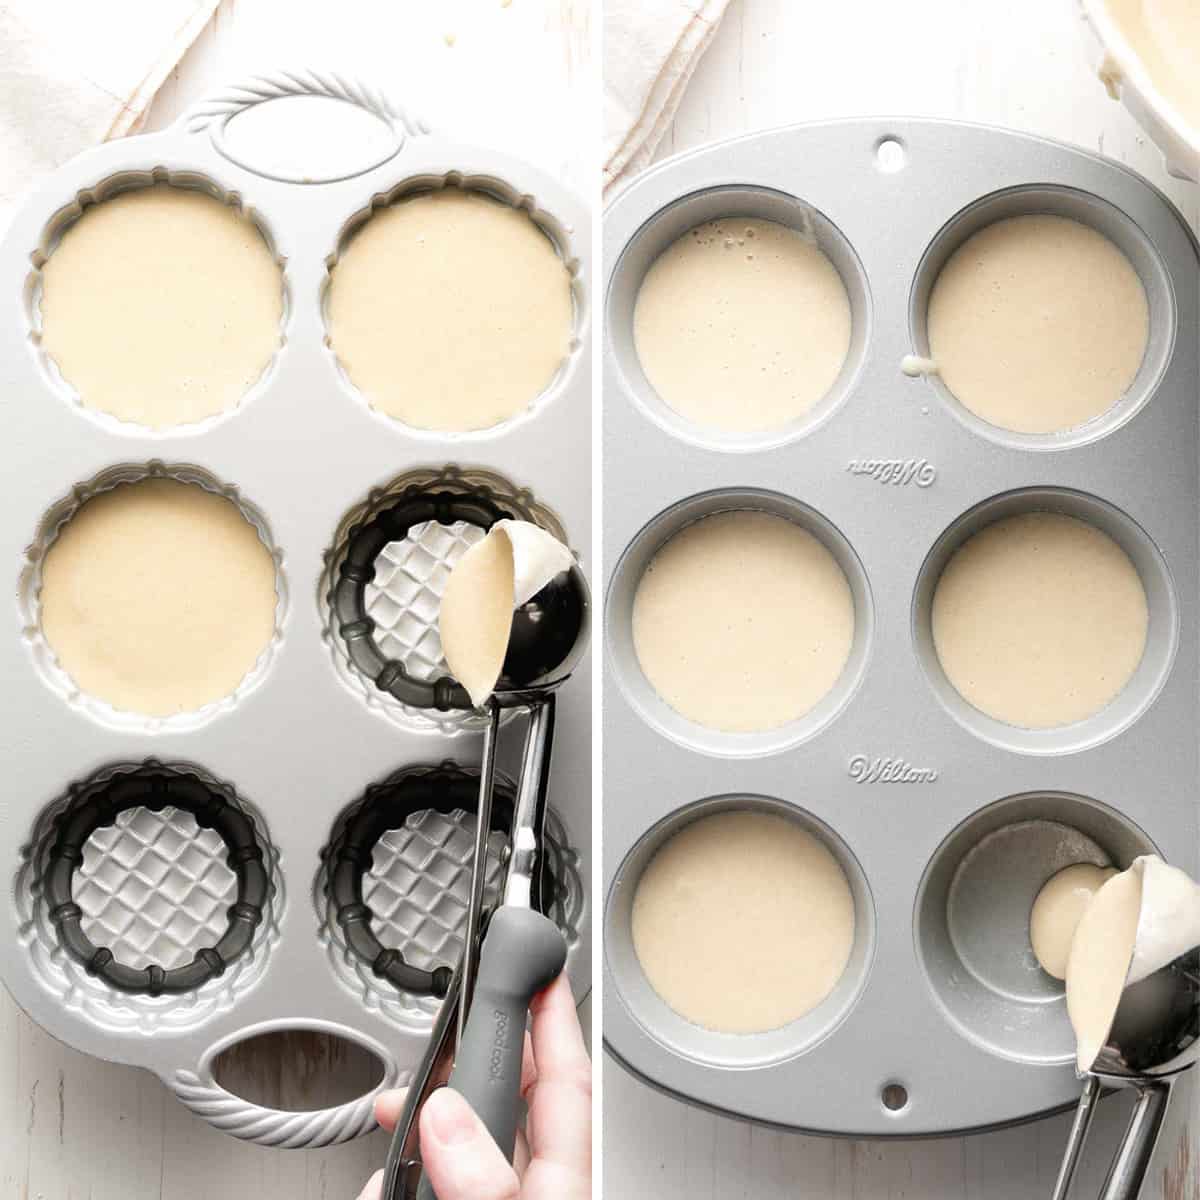 The collage shows the dough being scooped into a Nordic Ware pan and muffin tin.